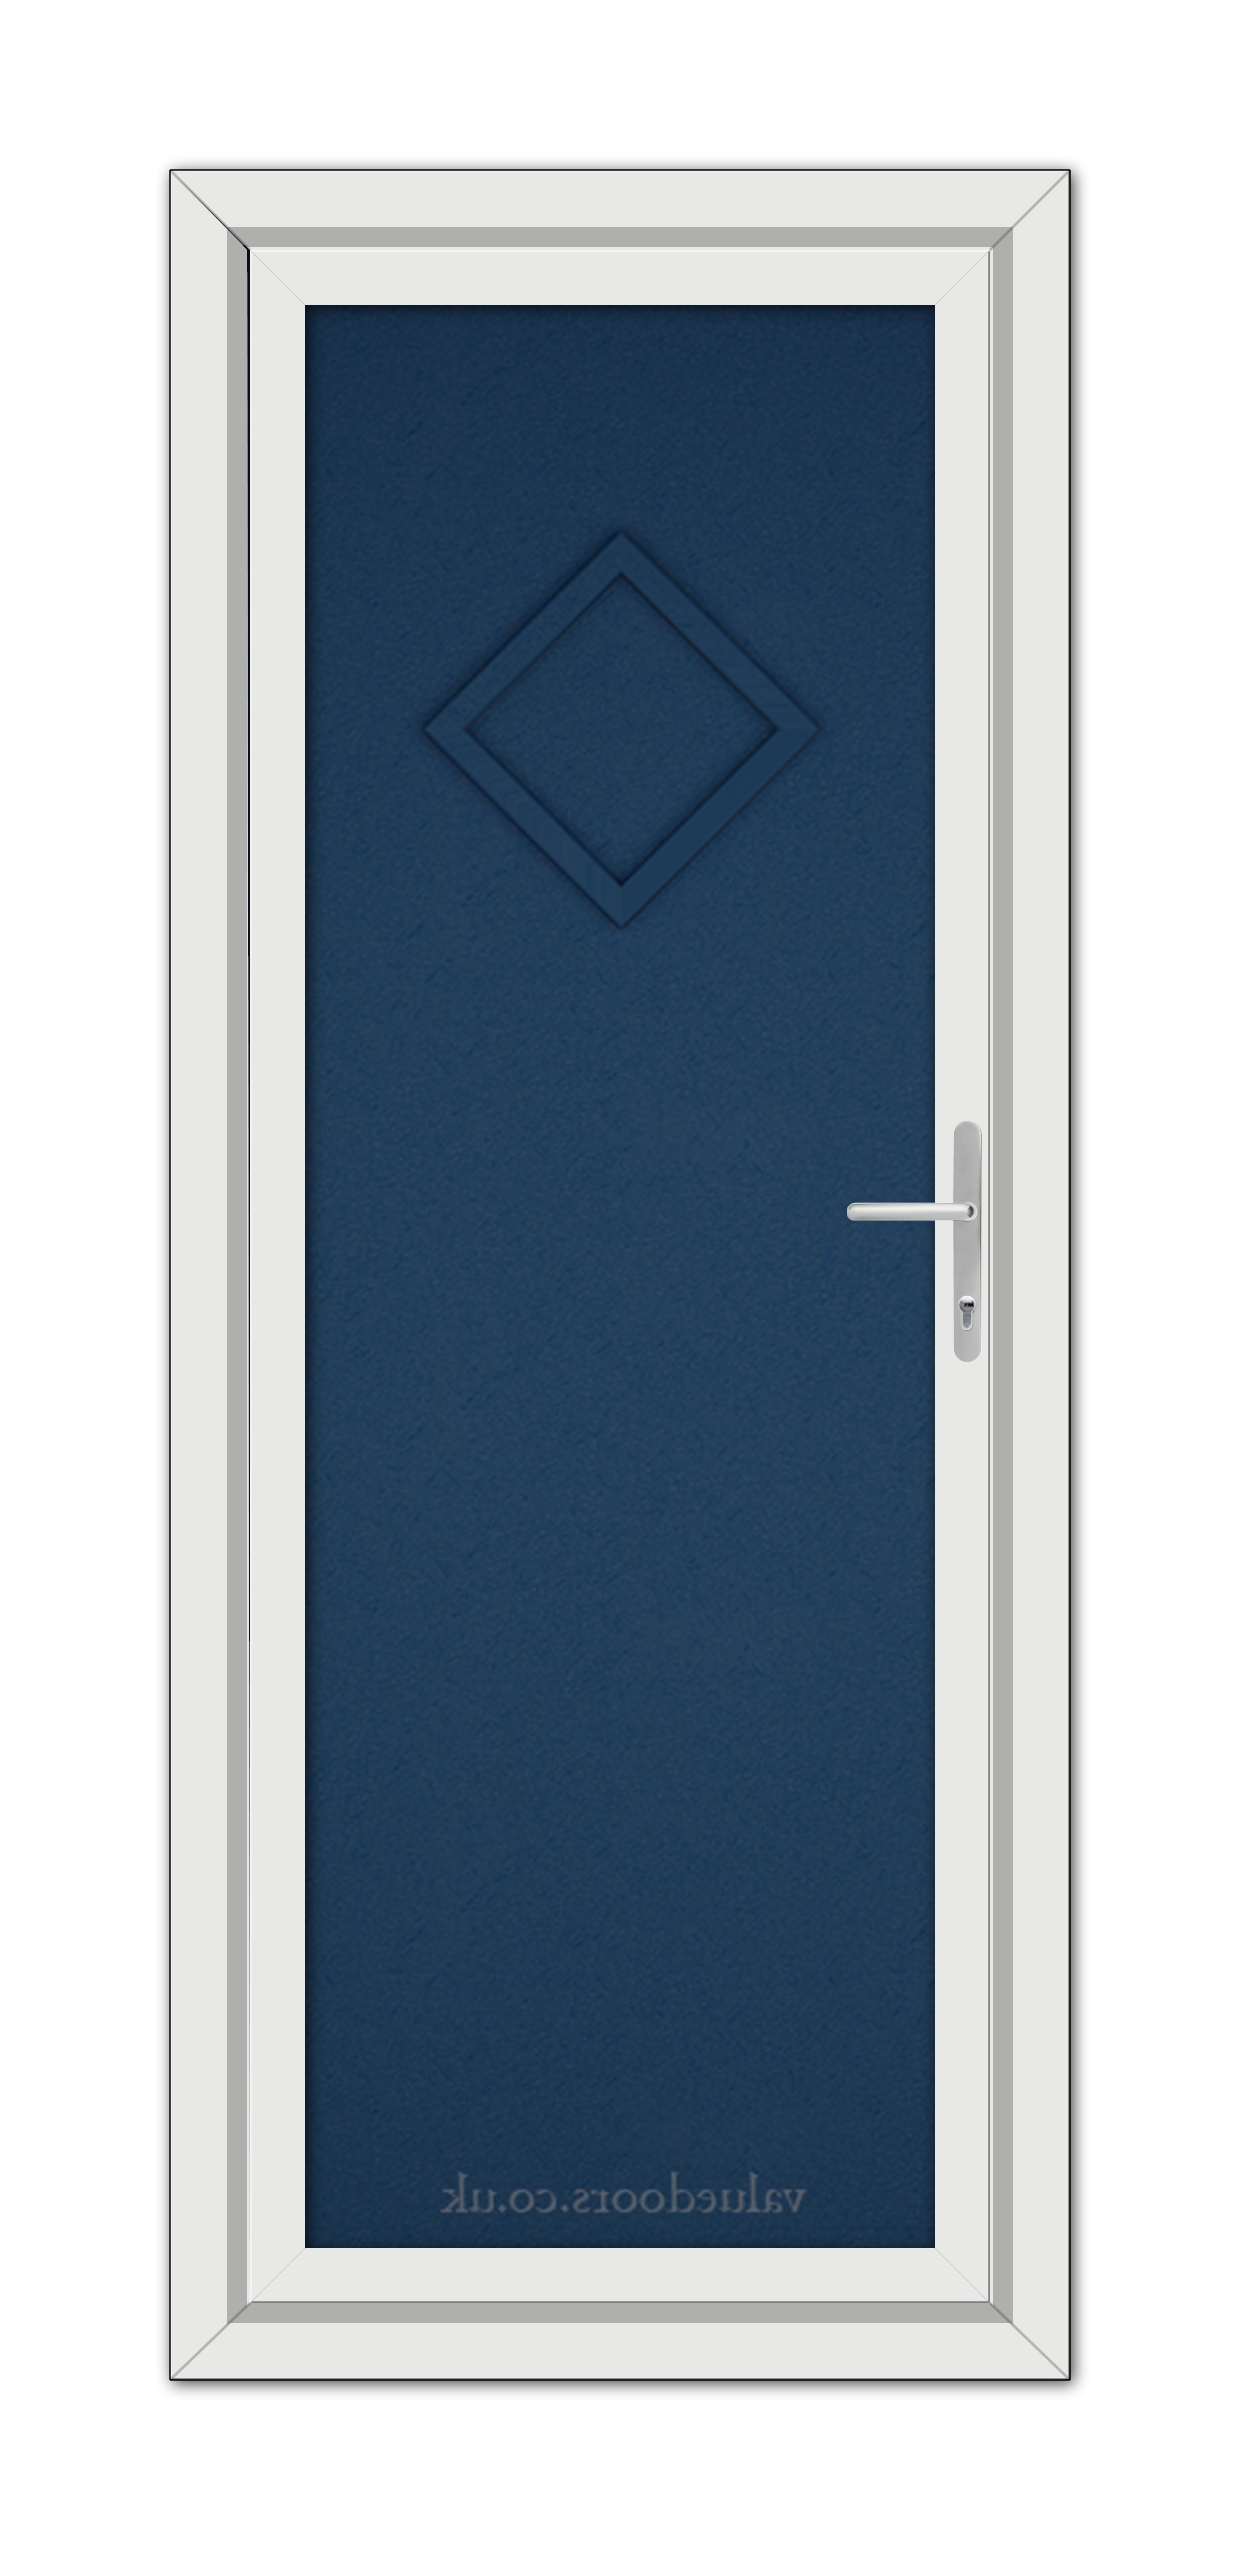 A vertical image of a closed Blue Modern 5131 Solid uPVC Door with a diamond pattern in the center, framed by a white door frame and featuring a metallic handle on the right side.